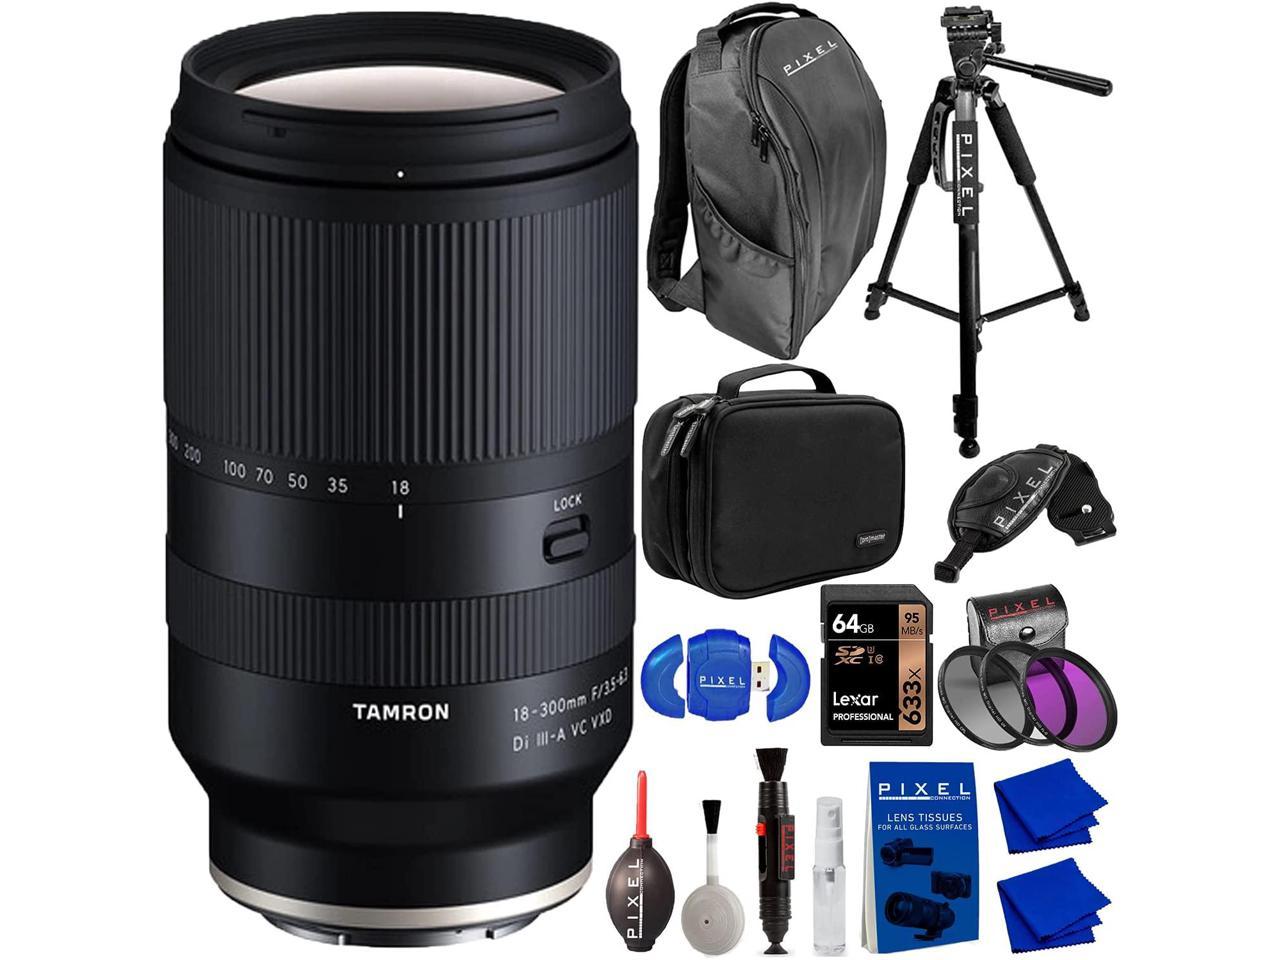 Tamron 18-300mm f/3.5-6.3 Di III-A VC VXD Lens for Sony E with Blower + Tripod + 64GB SD Card + Cleaning Kit + More